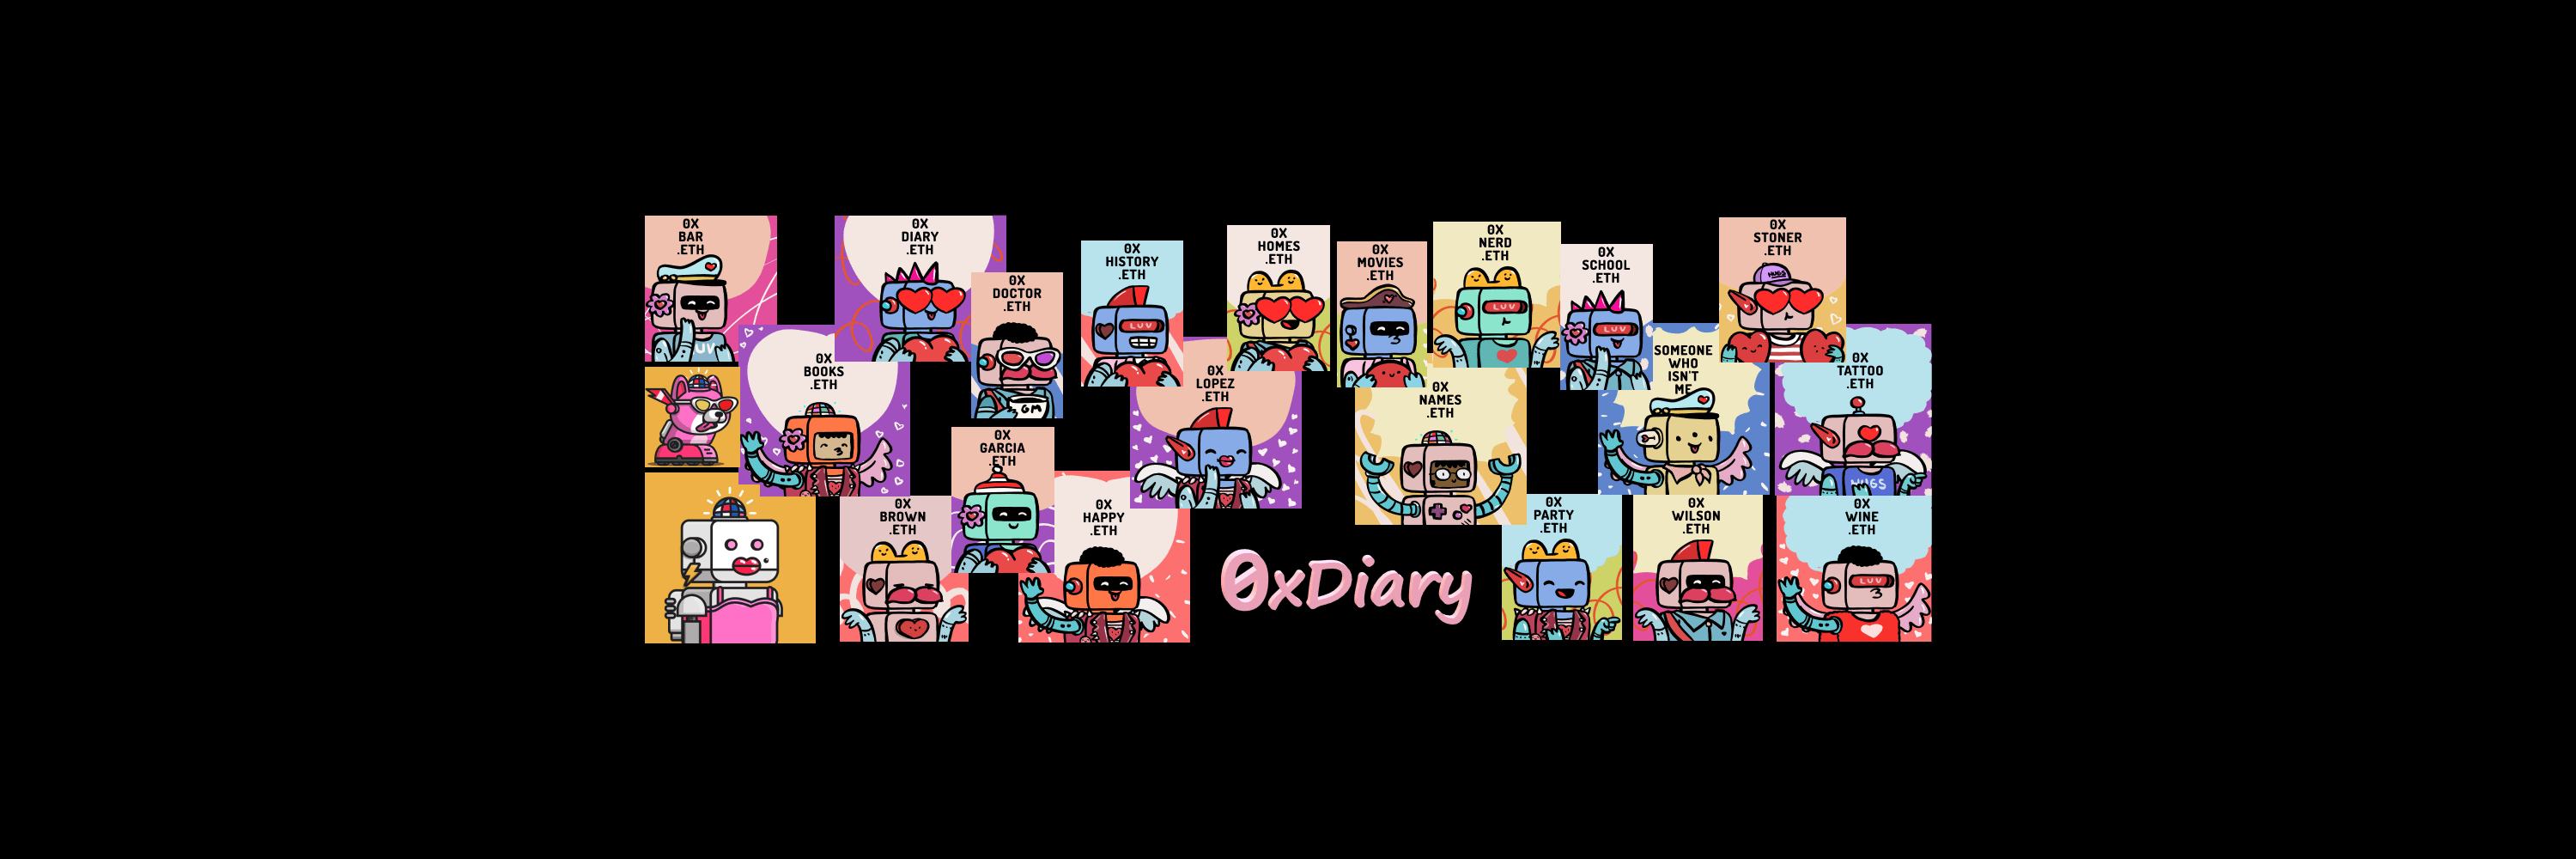 0xDiary banner